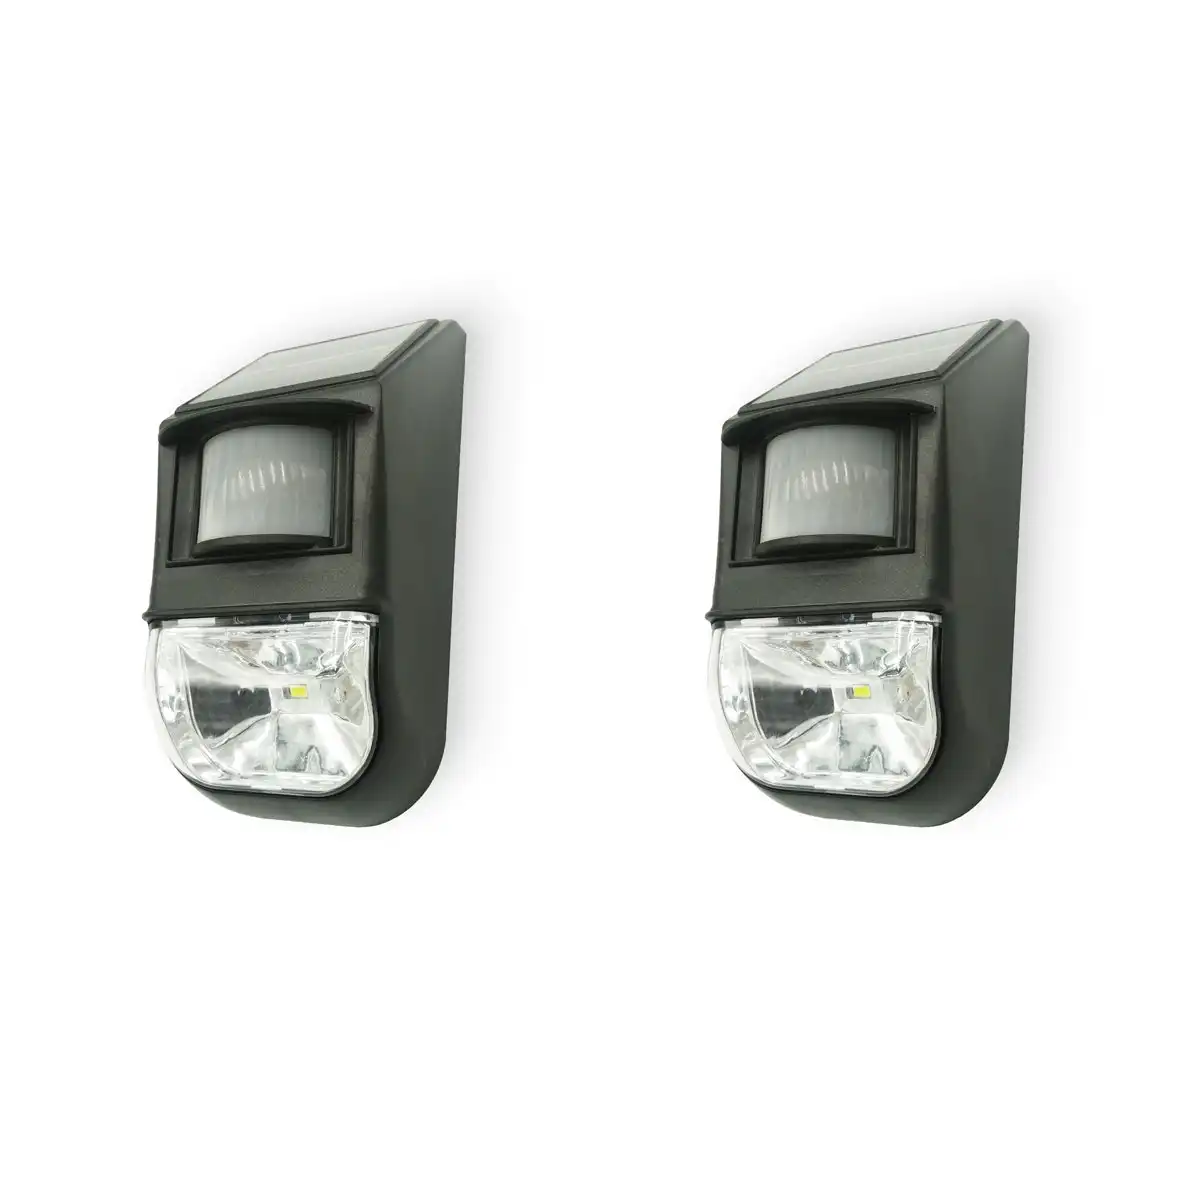 Solar-Powered Motion Sensor Light (2-Piece), Detects Motion, Rechargeable